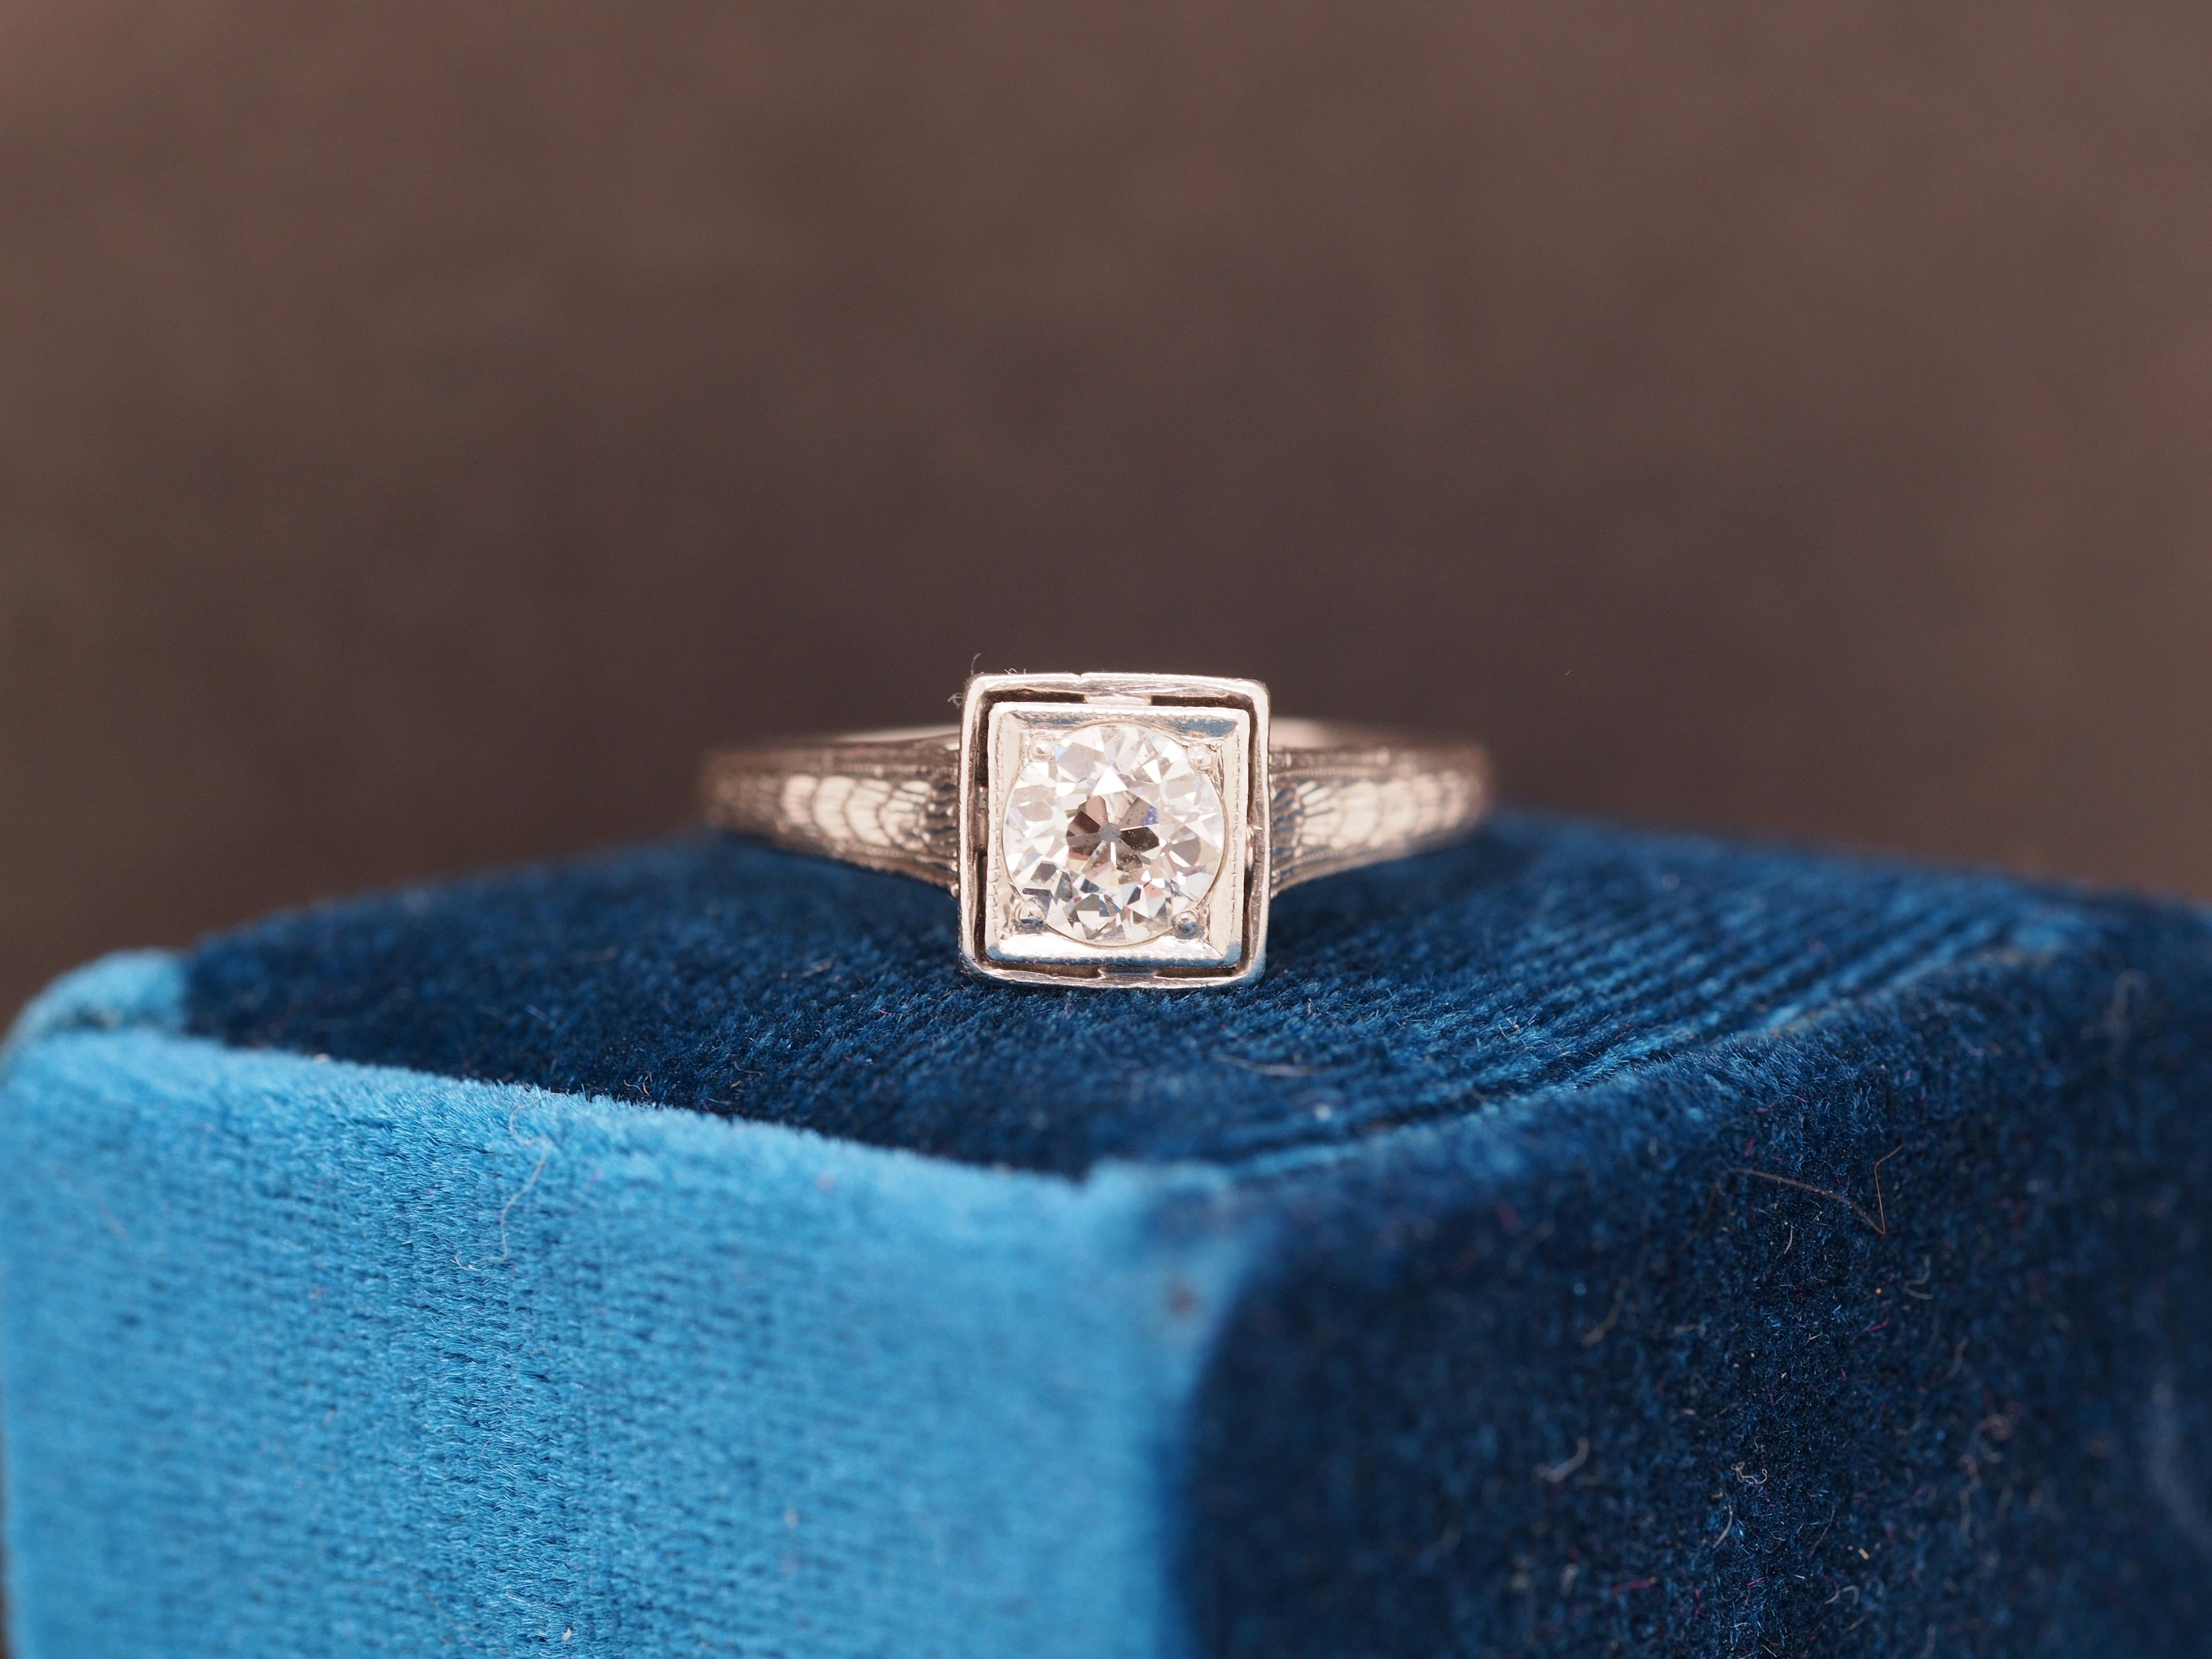 Year: 1920s
Item Details:
Ring Size: 6.25
Metal Type: Platinum [Hallmarked, and Tested]
Weight: 3.1 grams
Diamond Details
Center Diamond: .50ct, Old European Brilliant, G Color, SI2 Clarity
Band Width: 1.75mm
Condition: Excellent